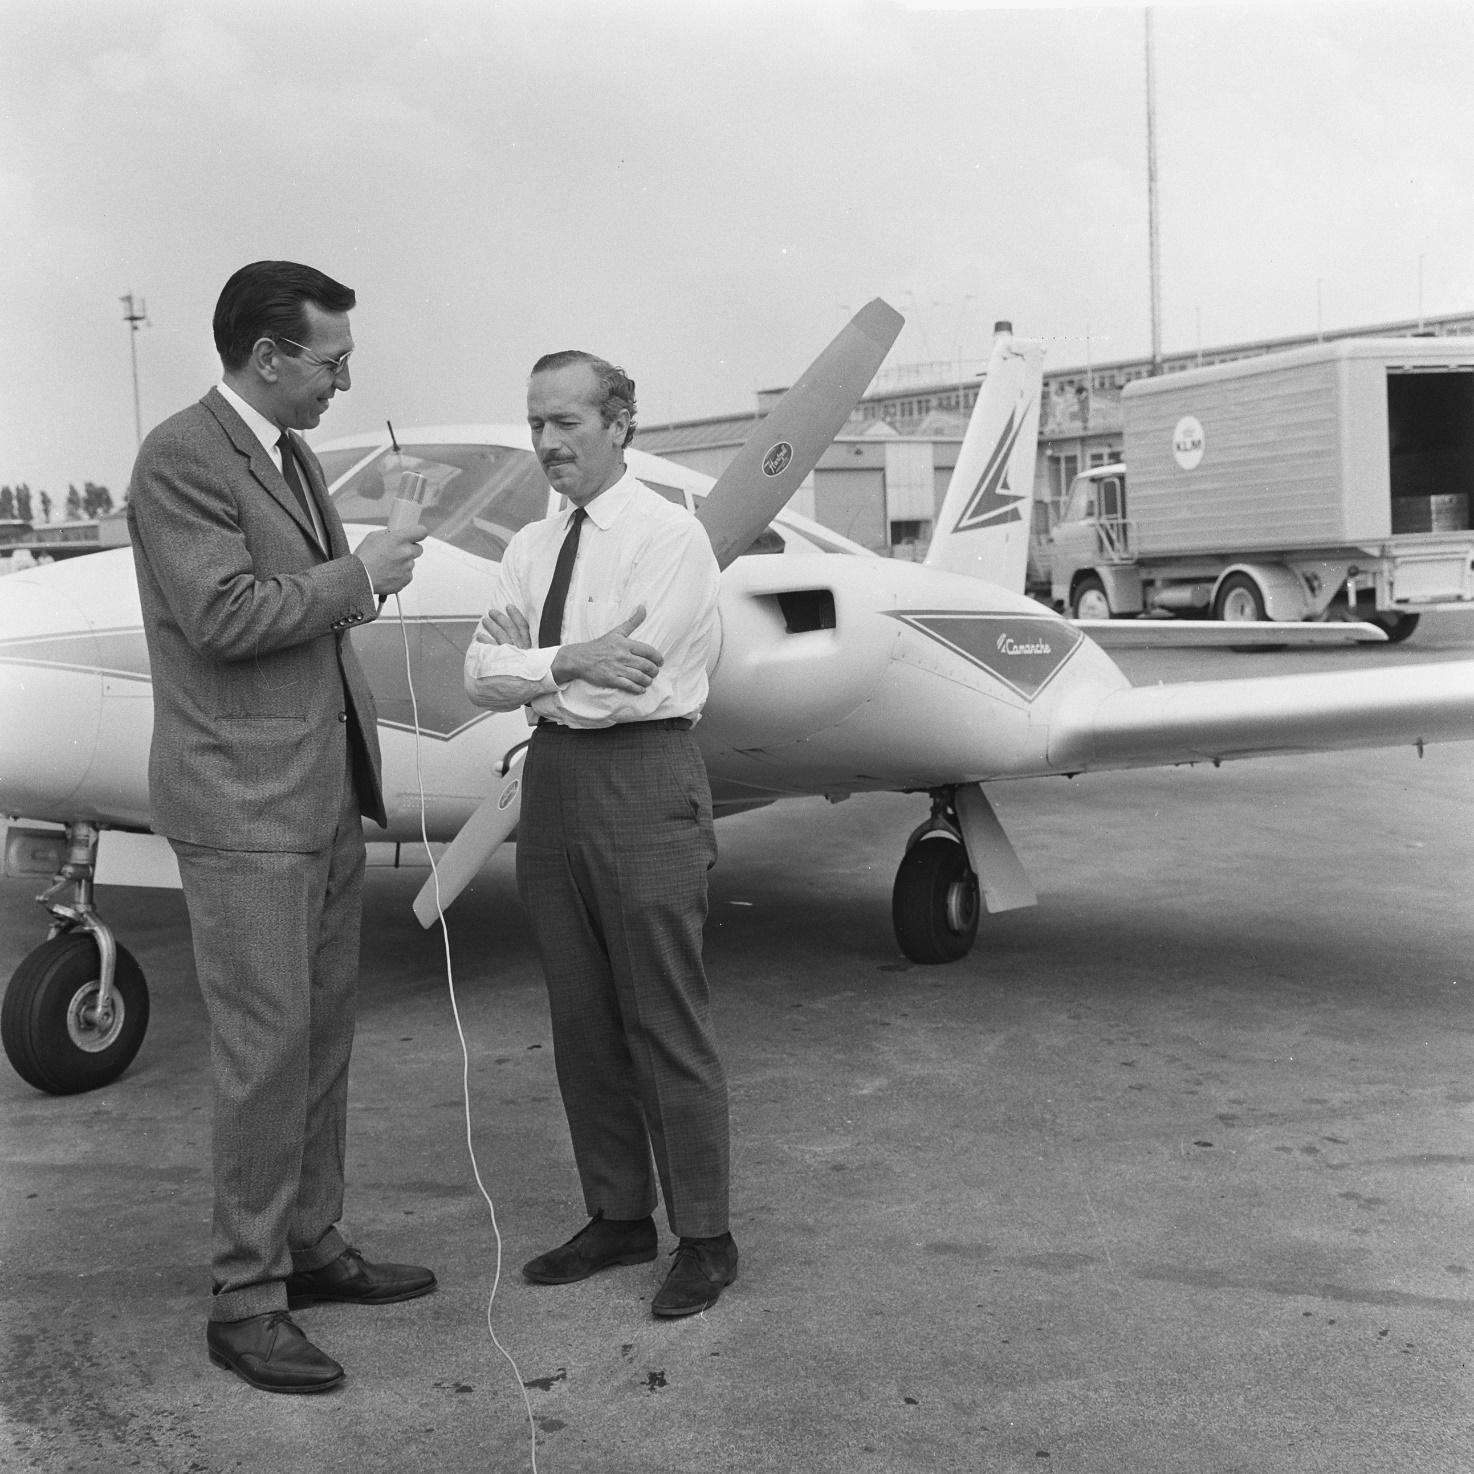 Colin Chapman interviewed in front of a private plane.